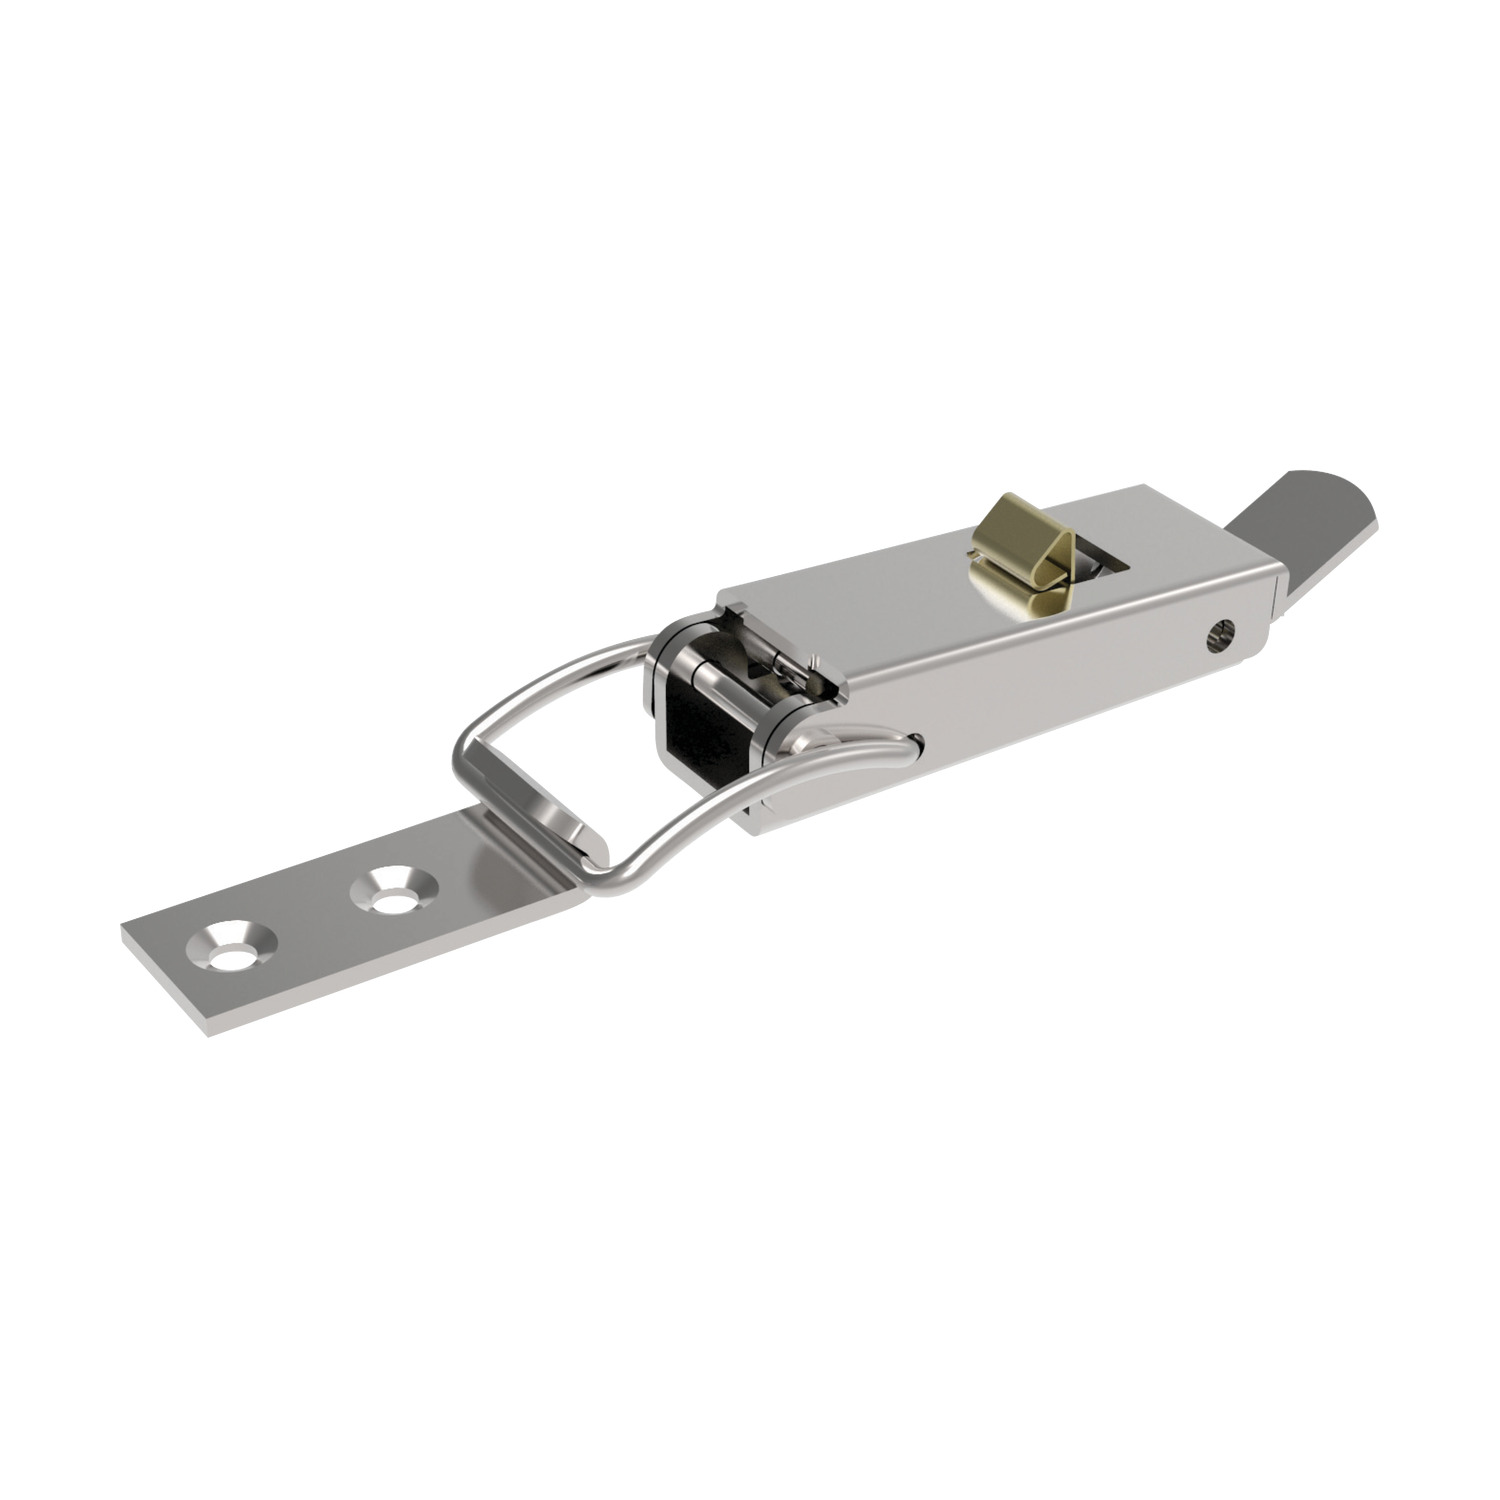 J0462.AC0030 Toggle Latches Stainless Steel - 102 - 11 - 23